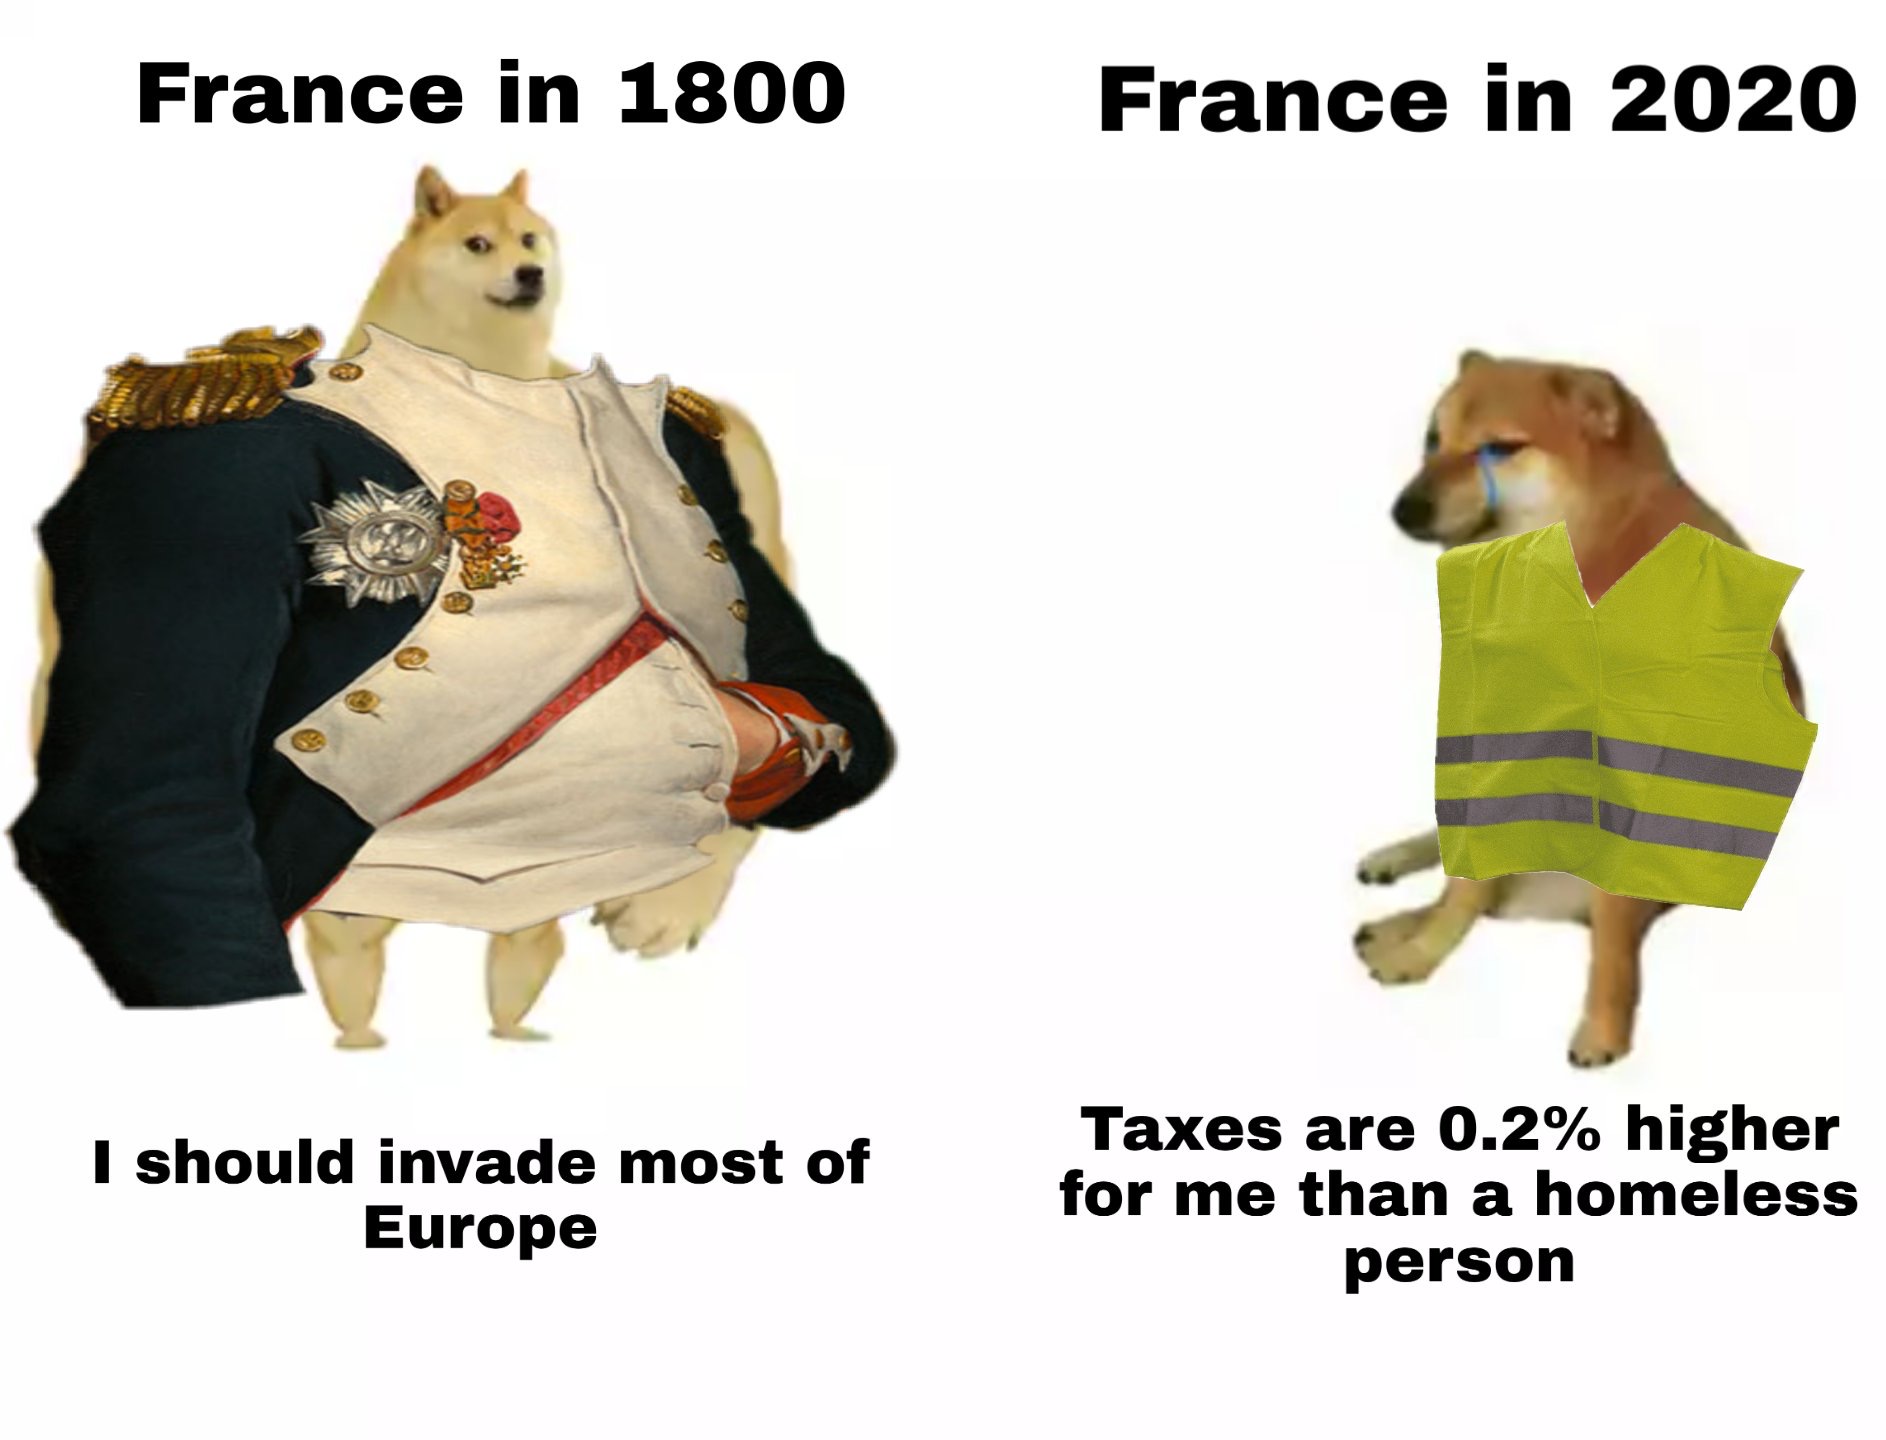 photo caption - France in 1800 France in 2020 4223 I should invade most of Europe Taxes are 0.2% higher for me than a homeless person